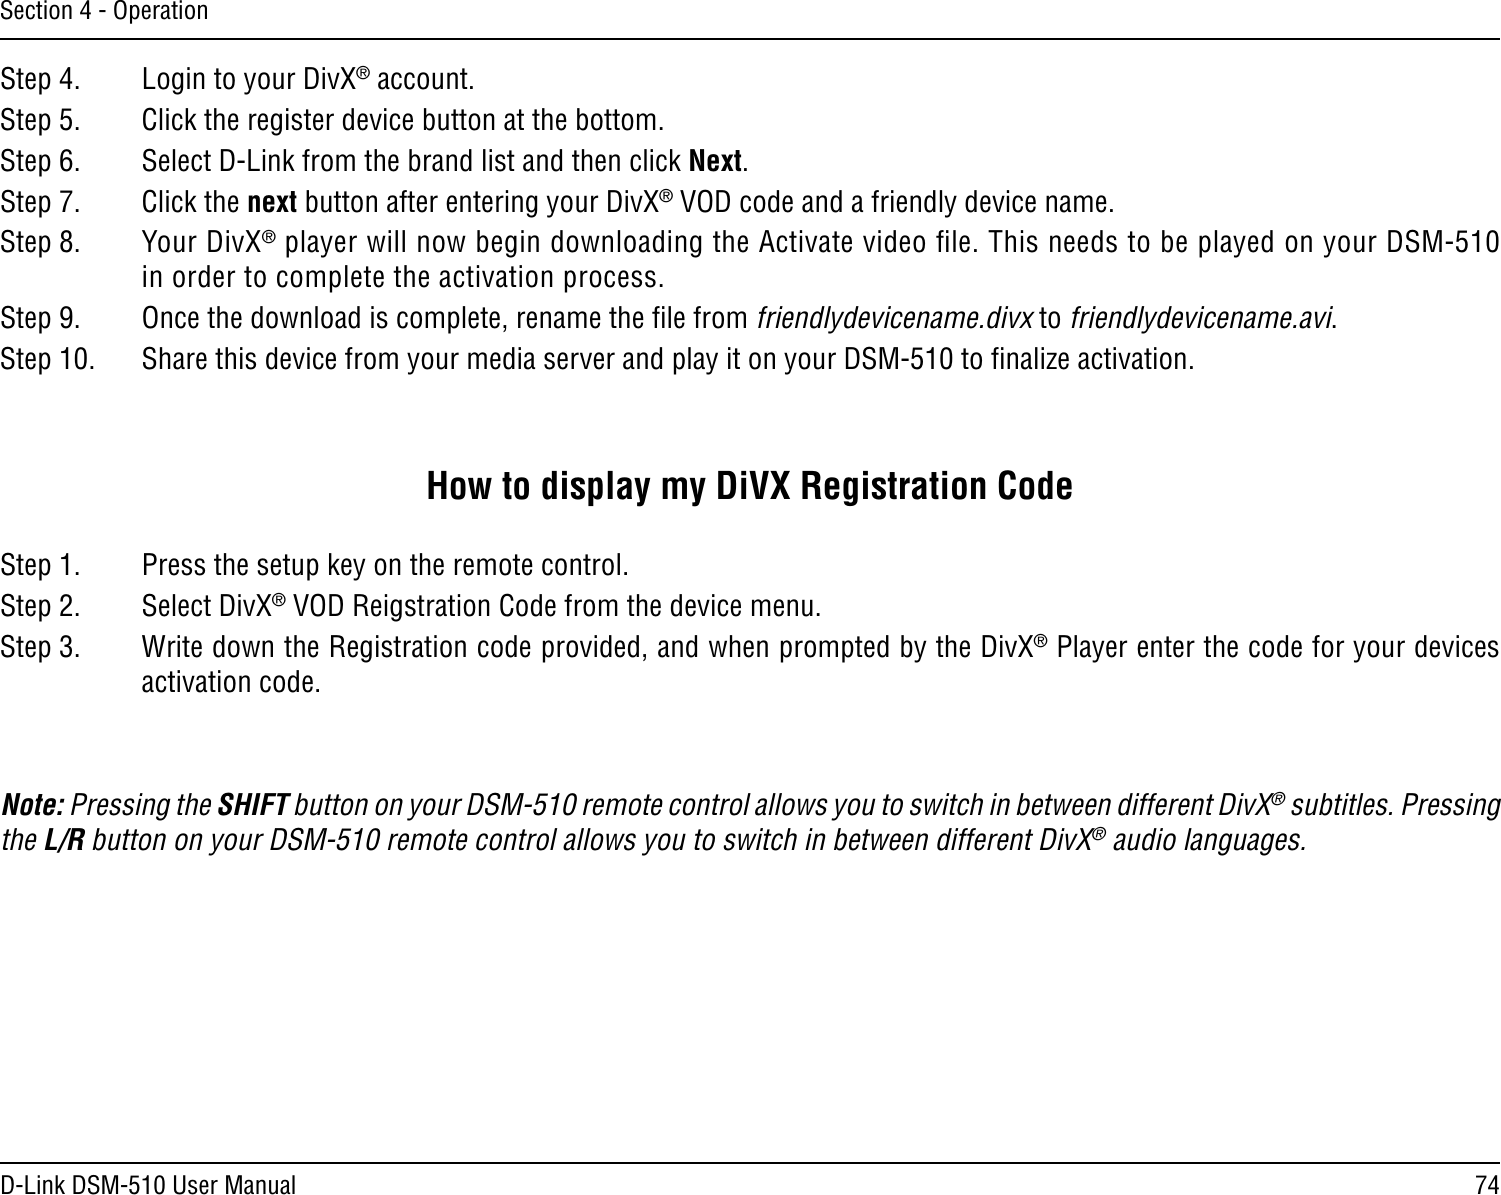 74D-Link DSM-510 User ManualSection 4 - OperationStep 4.   Login to your DivX® account.Step 5.   Click the register device button at the bottom.Step 6.   Select D-Link from the brand list and then click Next.Step 7.   Click the next button after entering your DivX® VOD code and a friendly device name.Step 8.   Your DivX® player will now begin downloading the Activate video ﬁle. This needs to be played on your DSM-510 in order to complete the activation process.Step 9.   Once the download is complete, rename the ﬁle from friendlydevicename.divx to friendlydevicename.avi.Step 10.   Share this device from your media server and play it on your DSM-510 to ﬁnalize activation.How to display my DiVX Registration CodeStep 1.   Press the setup key on the remote control.Step 2.   Select DivX® VOD Reigstration Code from the device menu.Step 3.   Write down the Registration code provided, and when prompted by the DivX® Player enter the code for your devices activation code.Note: Pressing the SHIFT button on your DSM-510 remote control allows you to switch in between different DivX® subtitles. Pressing the L/R button on your DSM-510 remote control allows you to switch in between different DivX® audio languages.